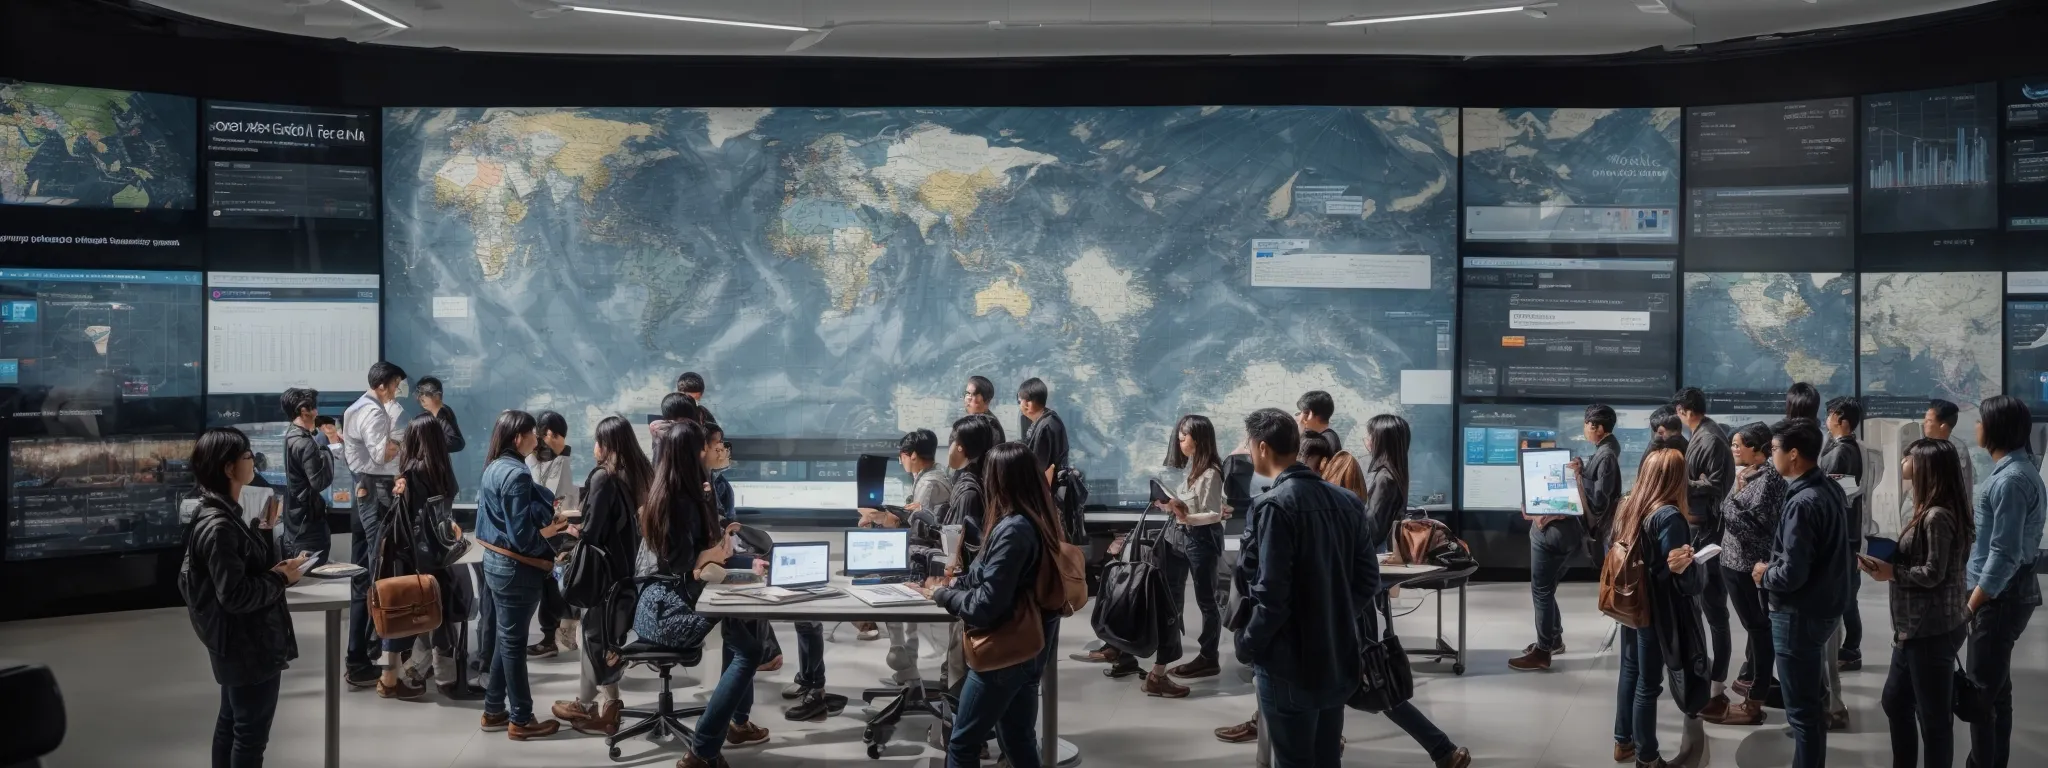 a wide-angle view of a bustling social media marketing team collaborating over a large digital touchscreen display with a world map, showing various social media platforms in a high-tech office.